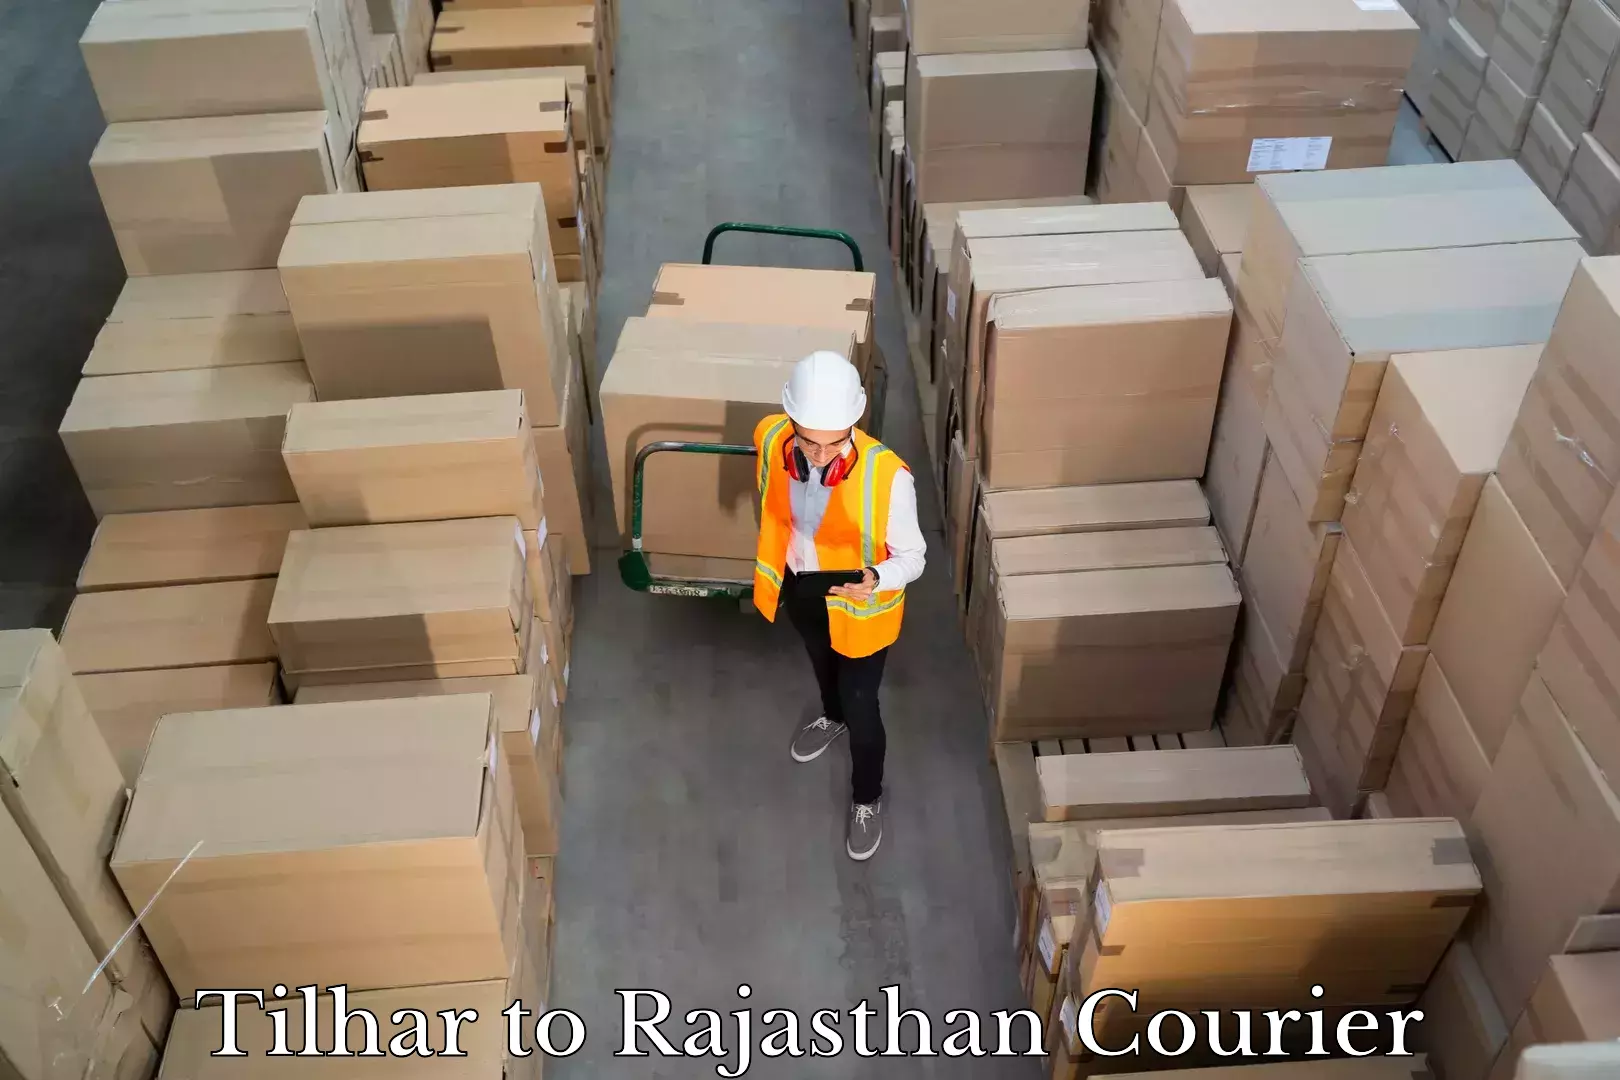 Luggage shipment specialists Tilhar to Birla Institute of Technology and Science Pilani